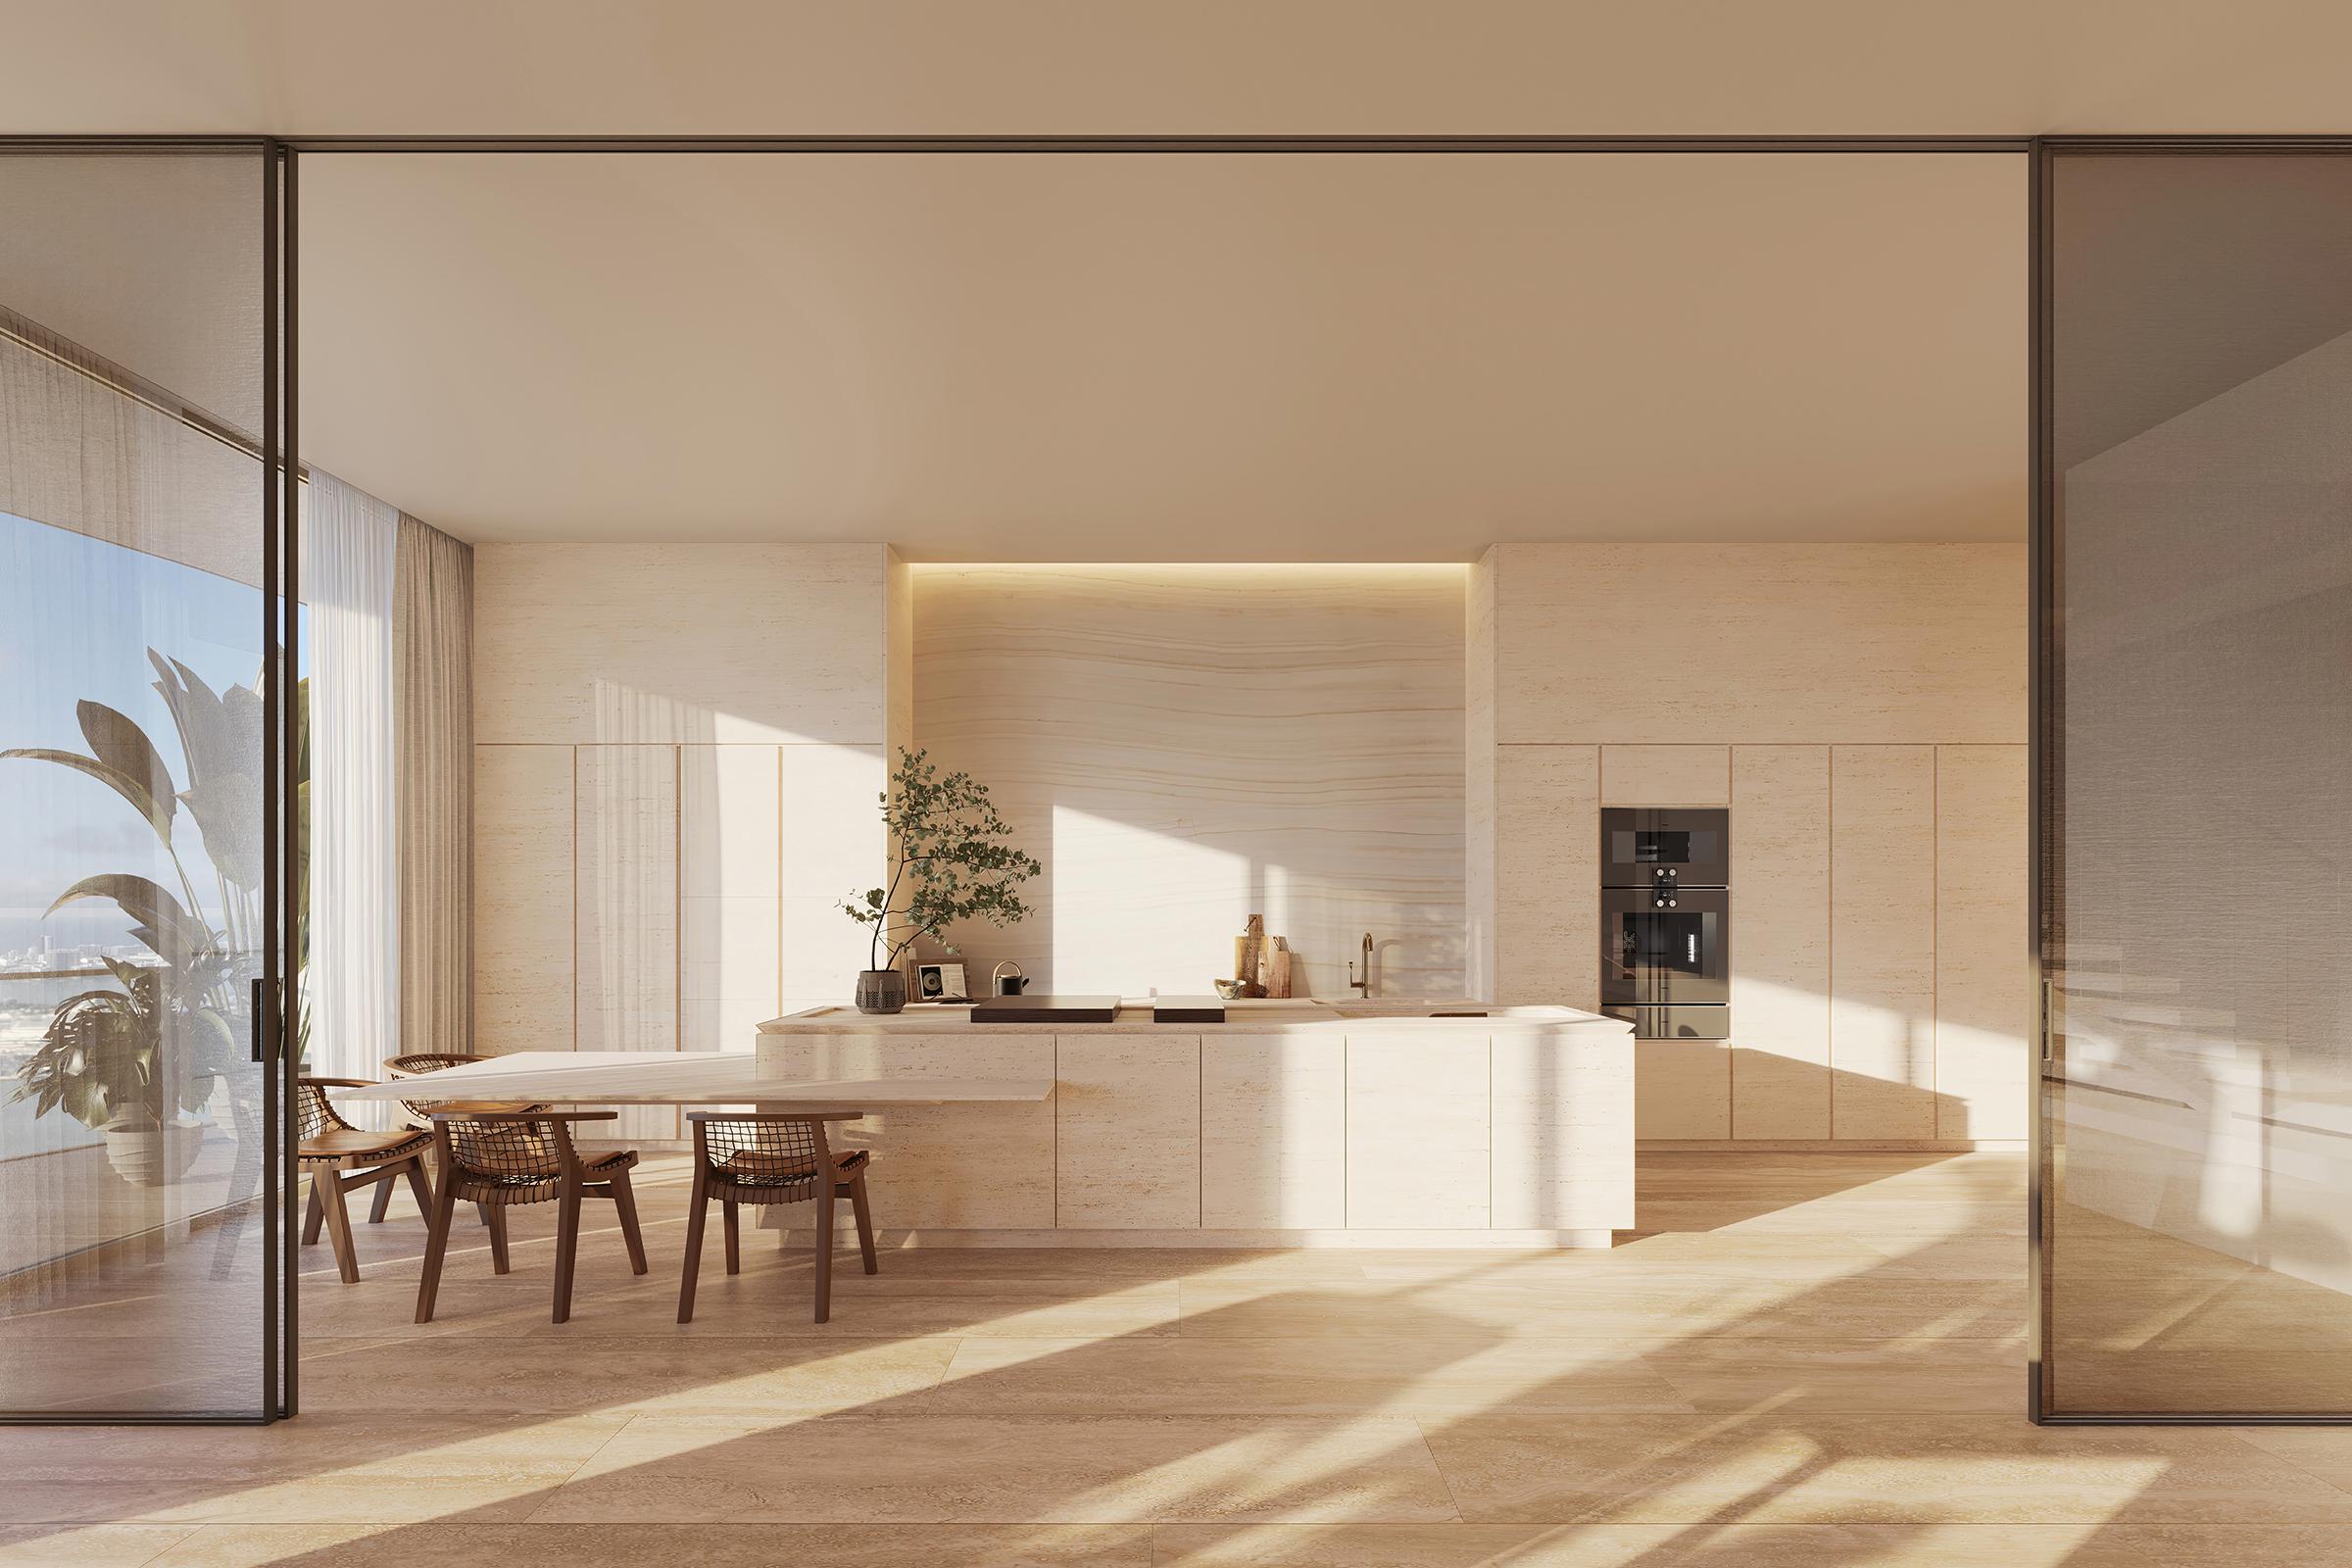 Rendering of The Residences at 1428 Brickell Kitchen